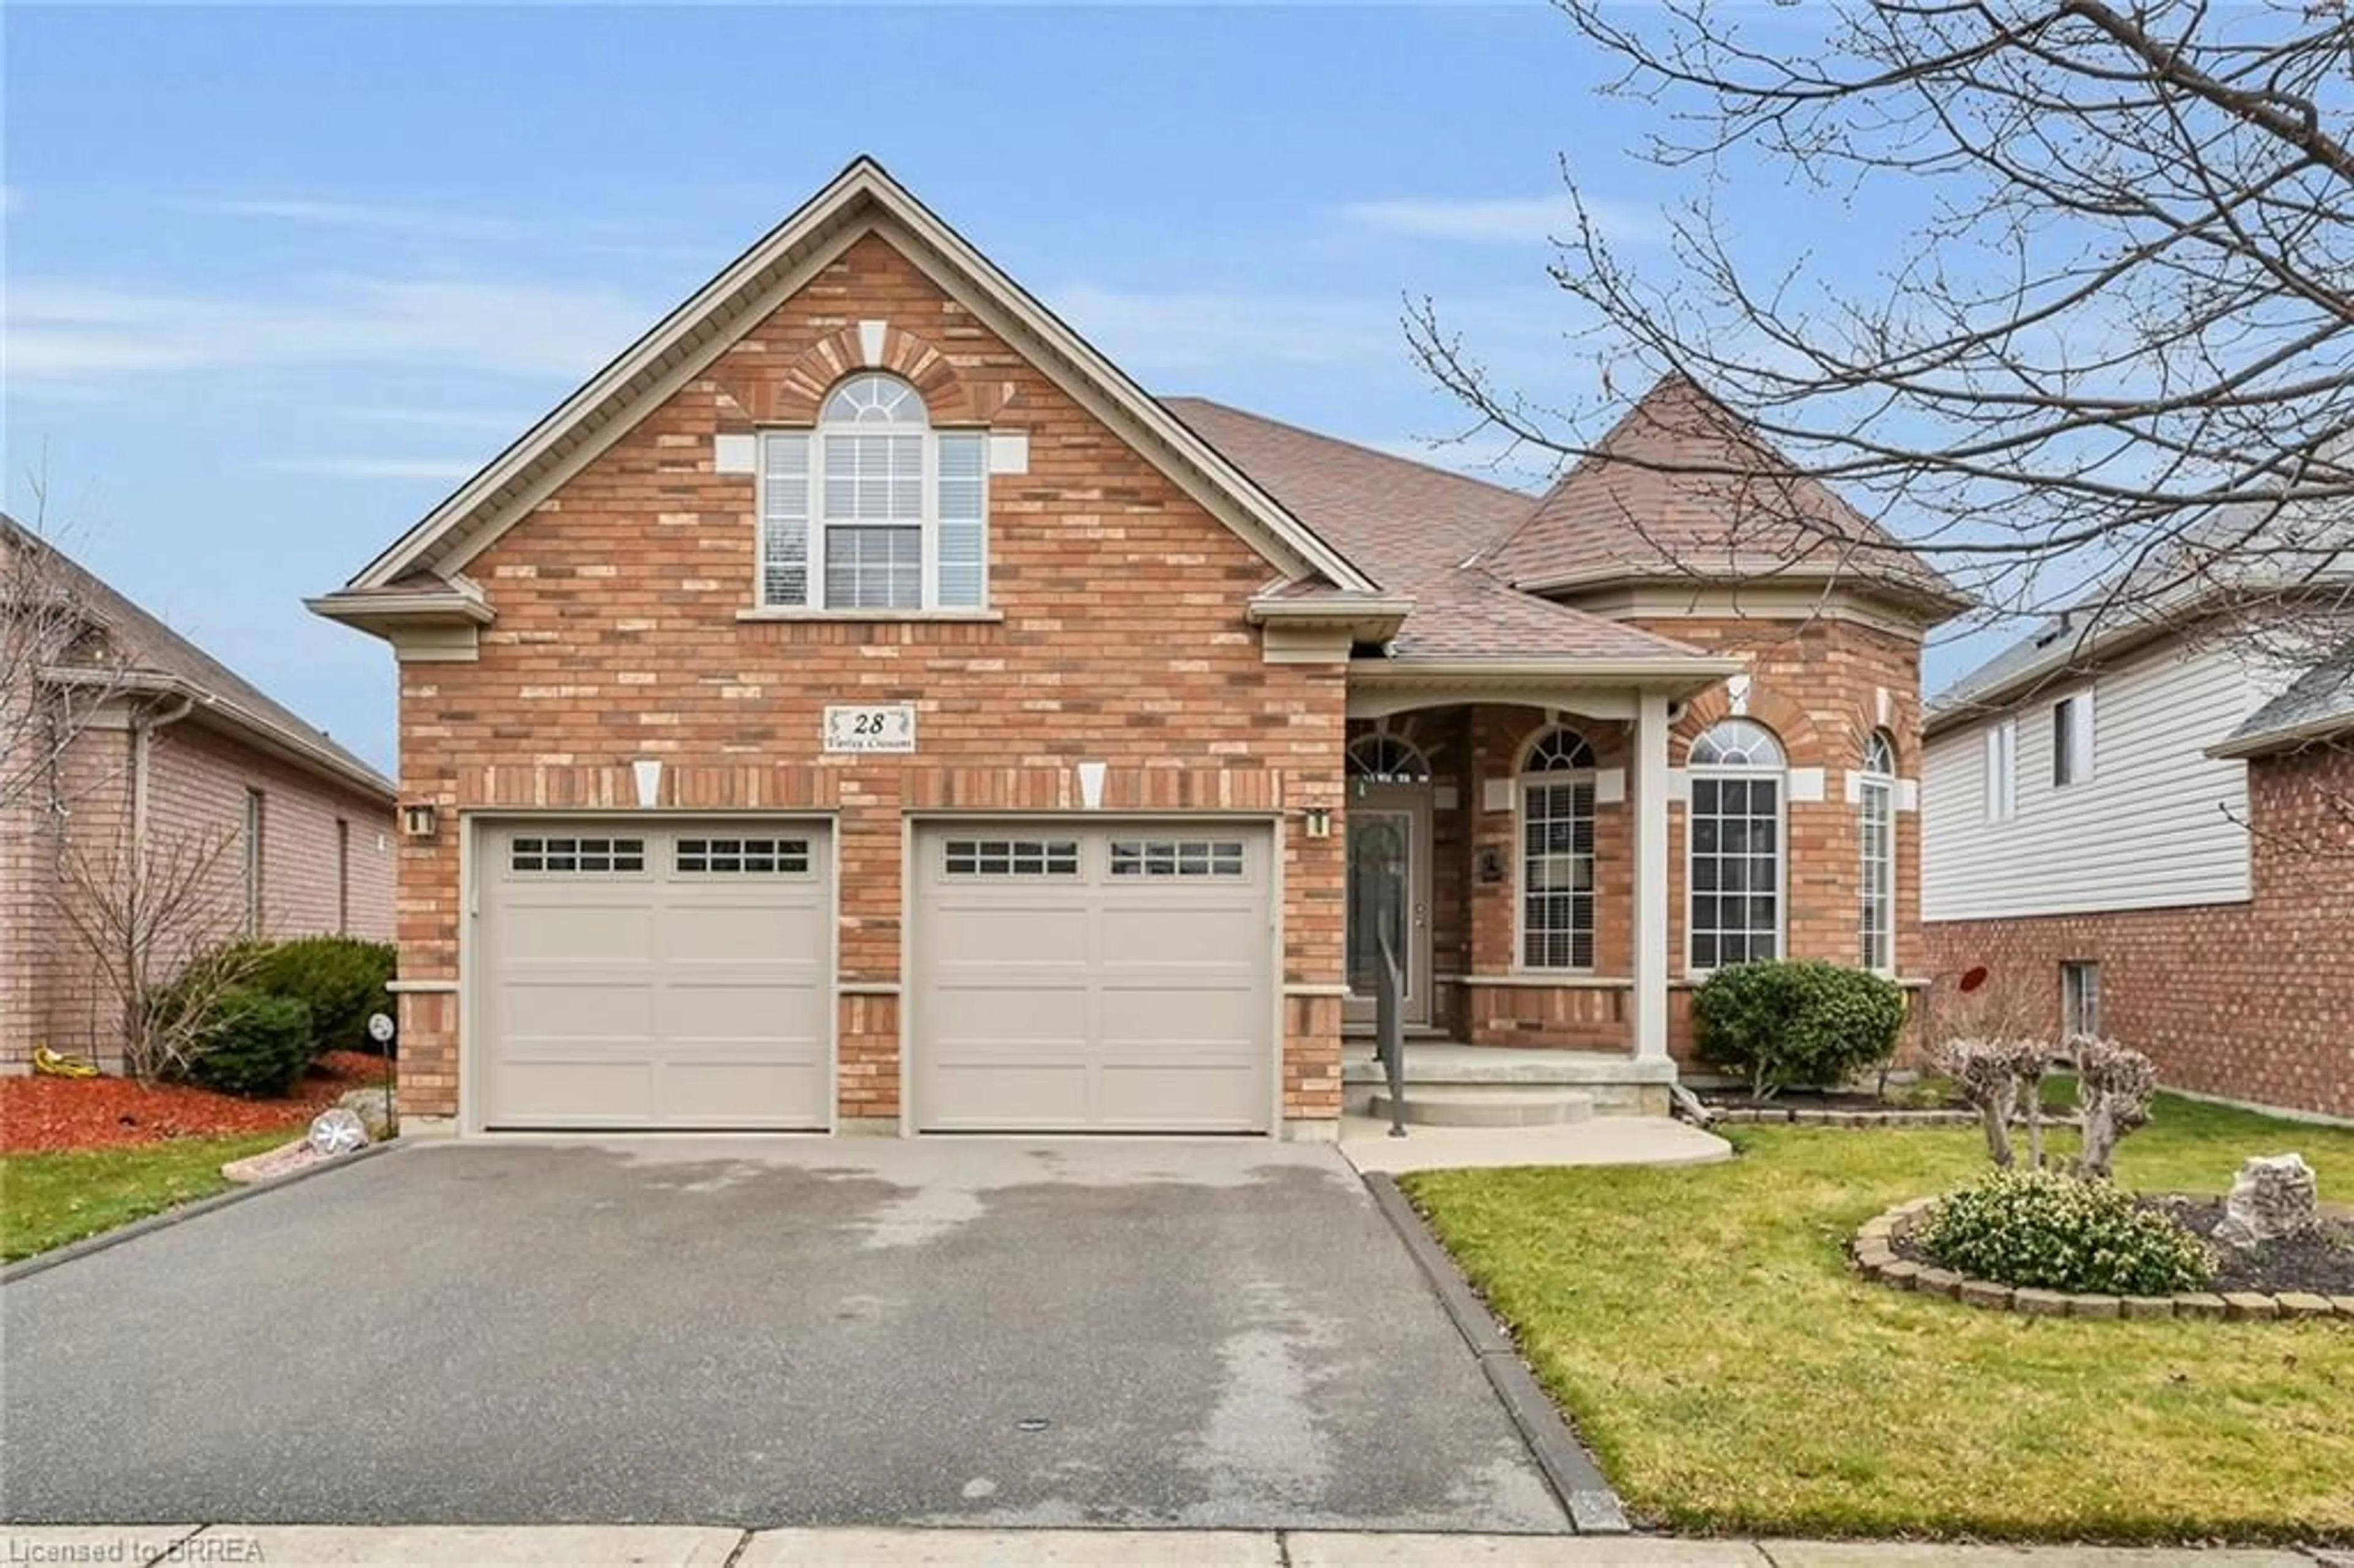 Home with brick exterior material for 28 Varley Cres, Brantford Ontario N3R 7Z7